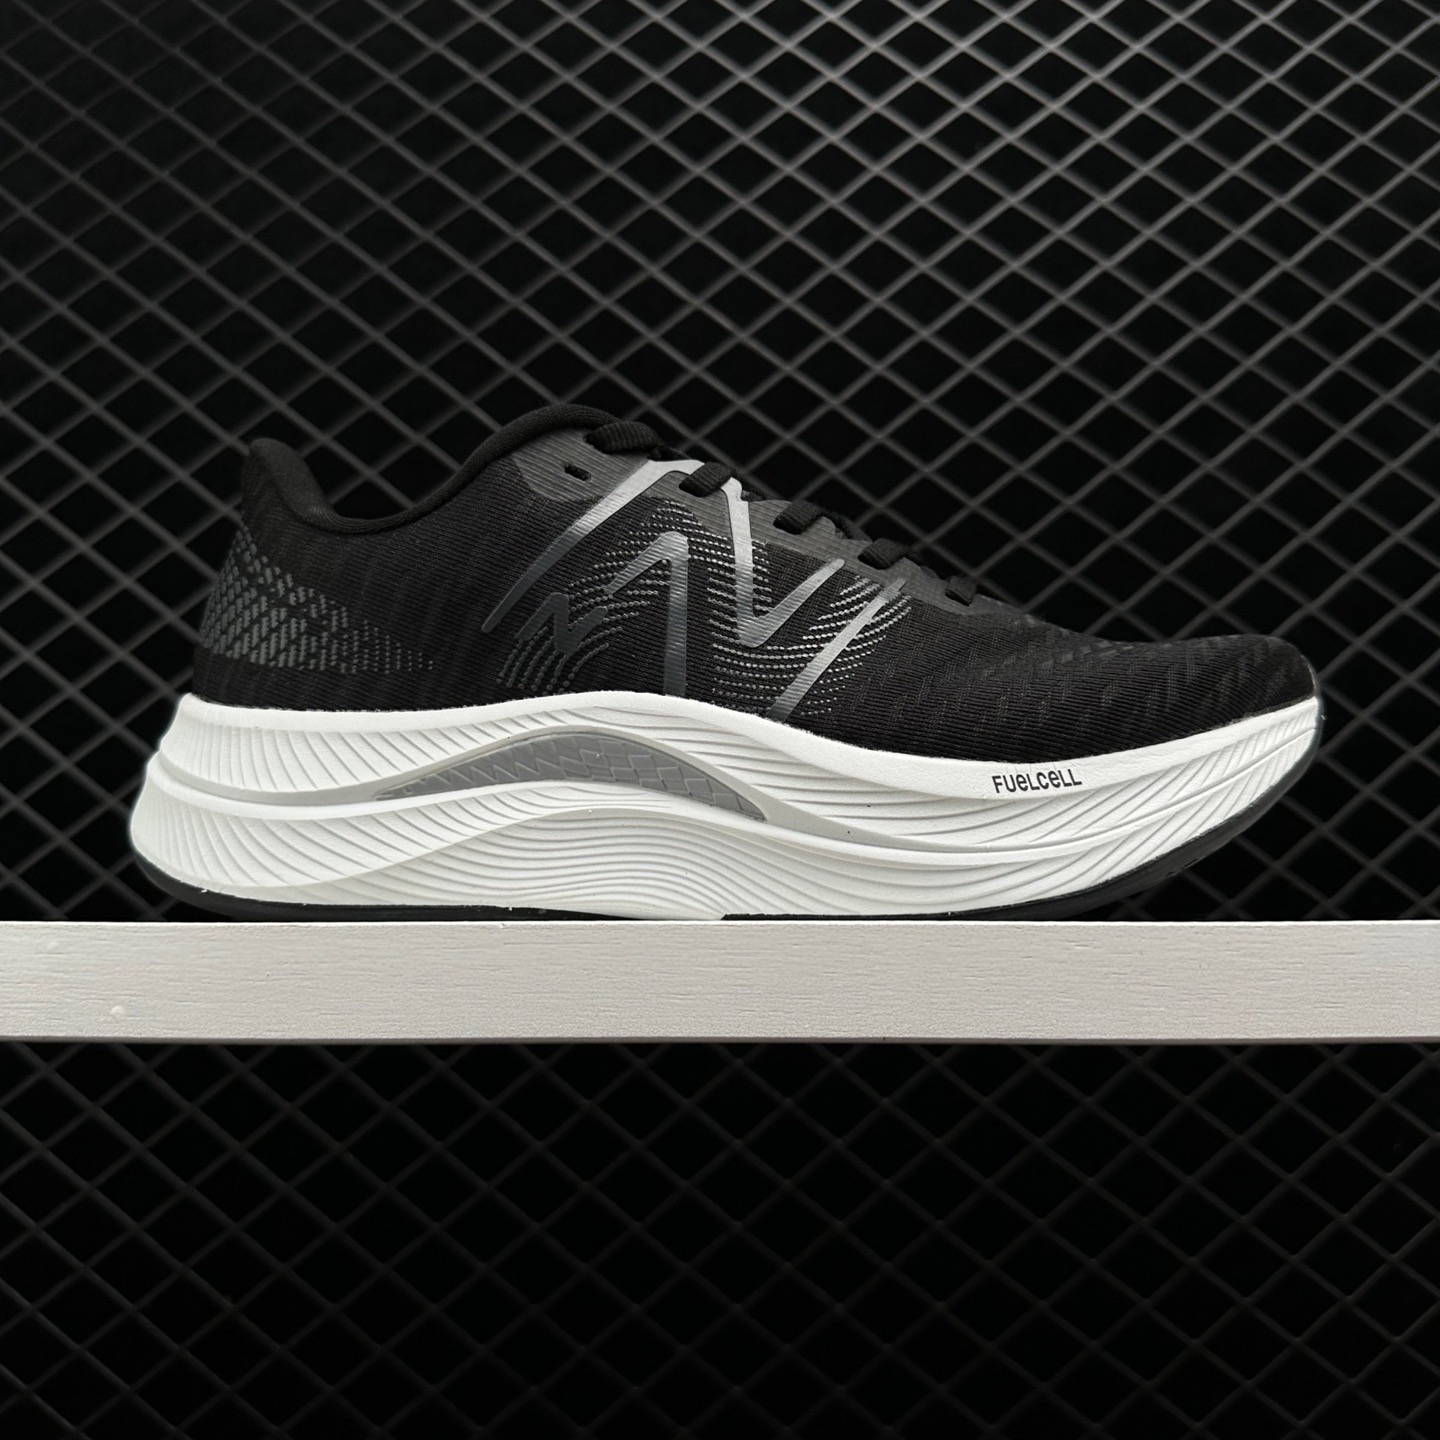 New Balance FuelCell Propel v4 - Black Silver | Lightweight Performance